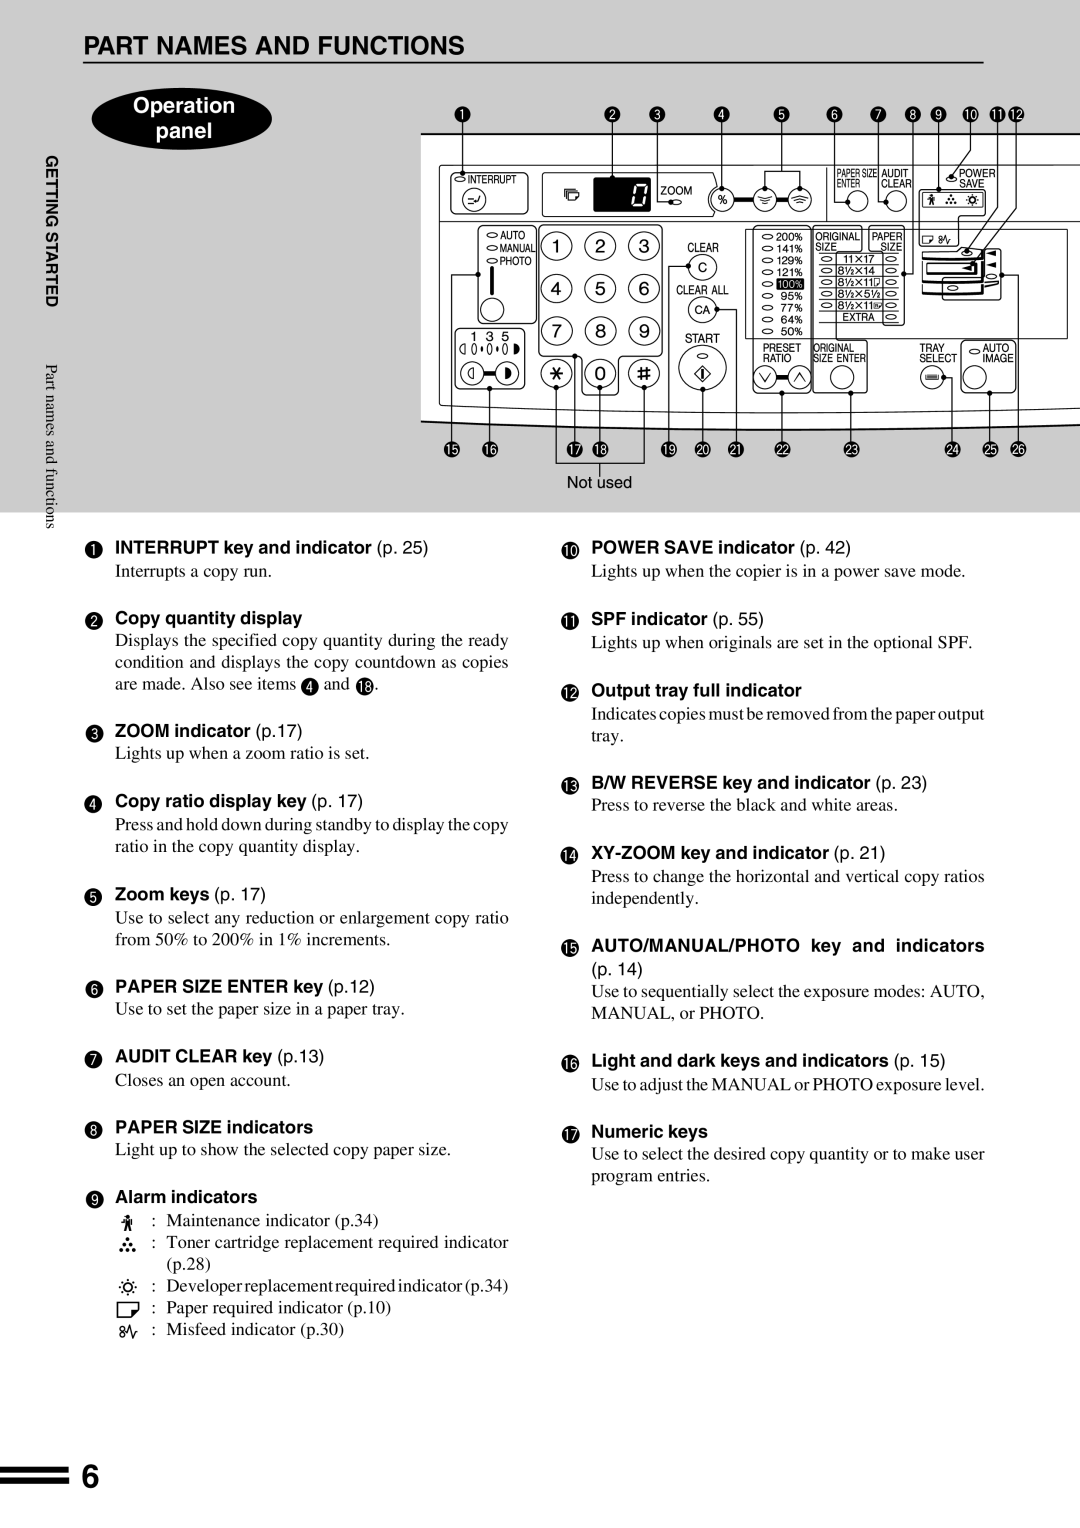 Sharp AR-162S operation manual Operation panel, Part Names And Functions 